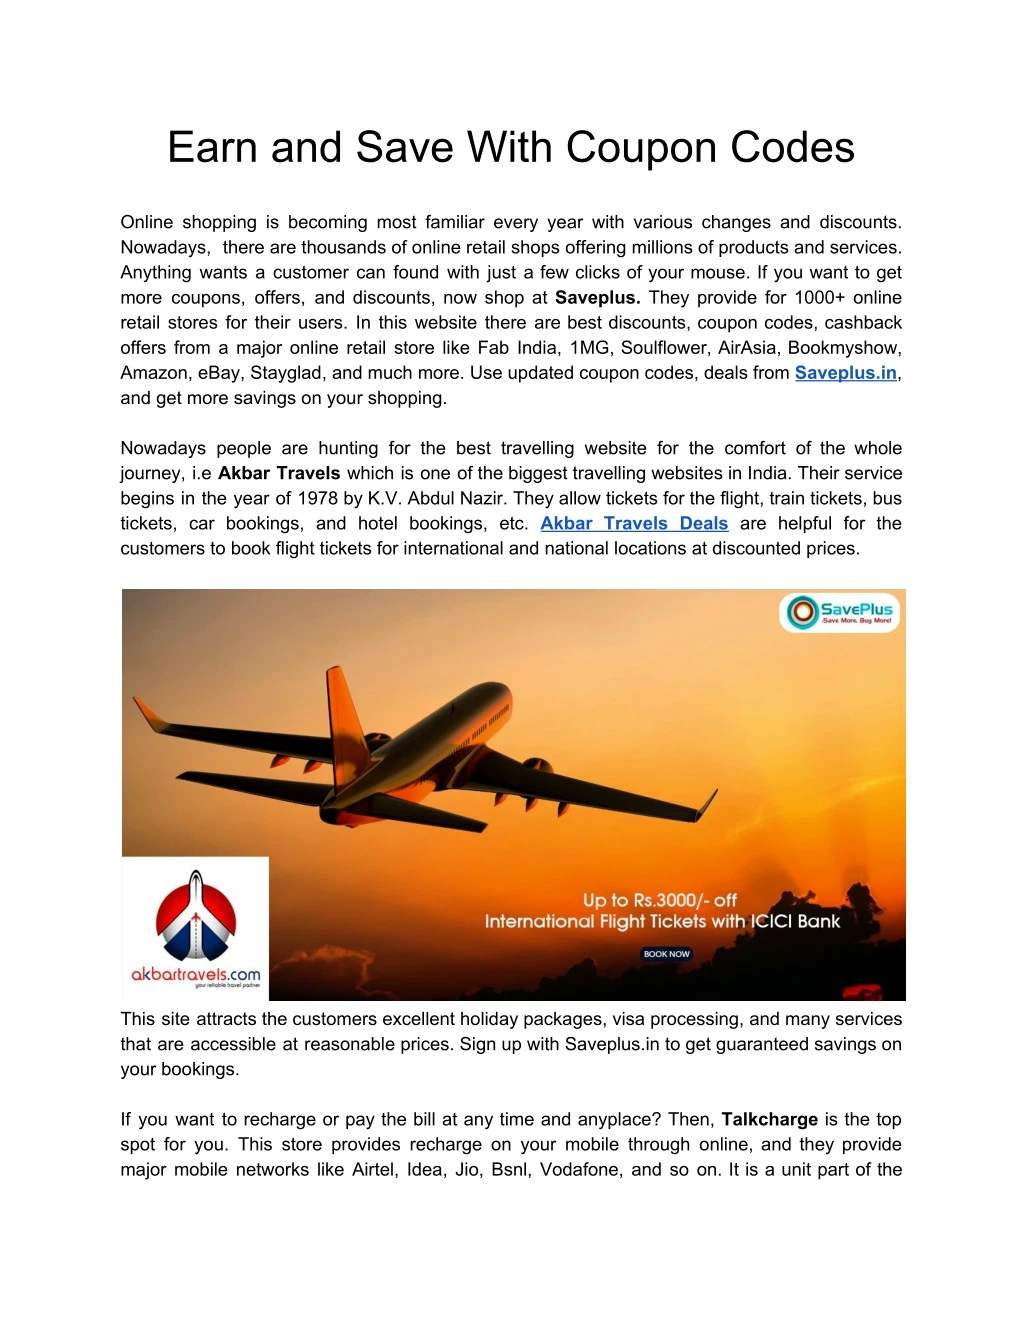 earn and save with coupon codes